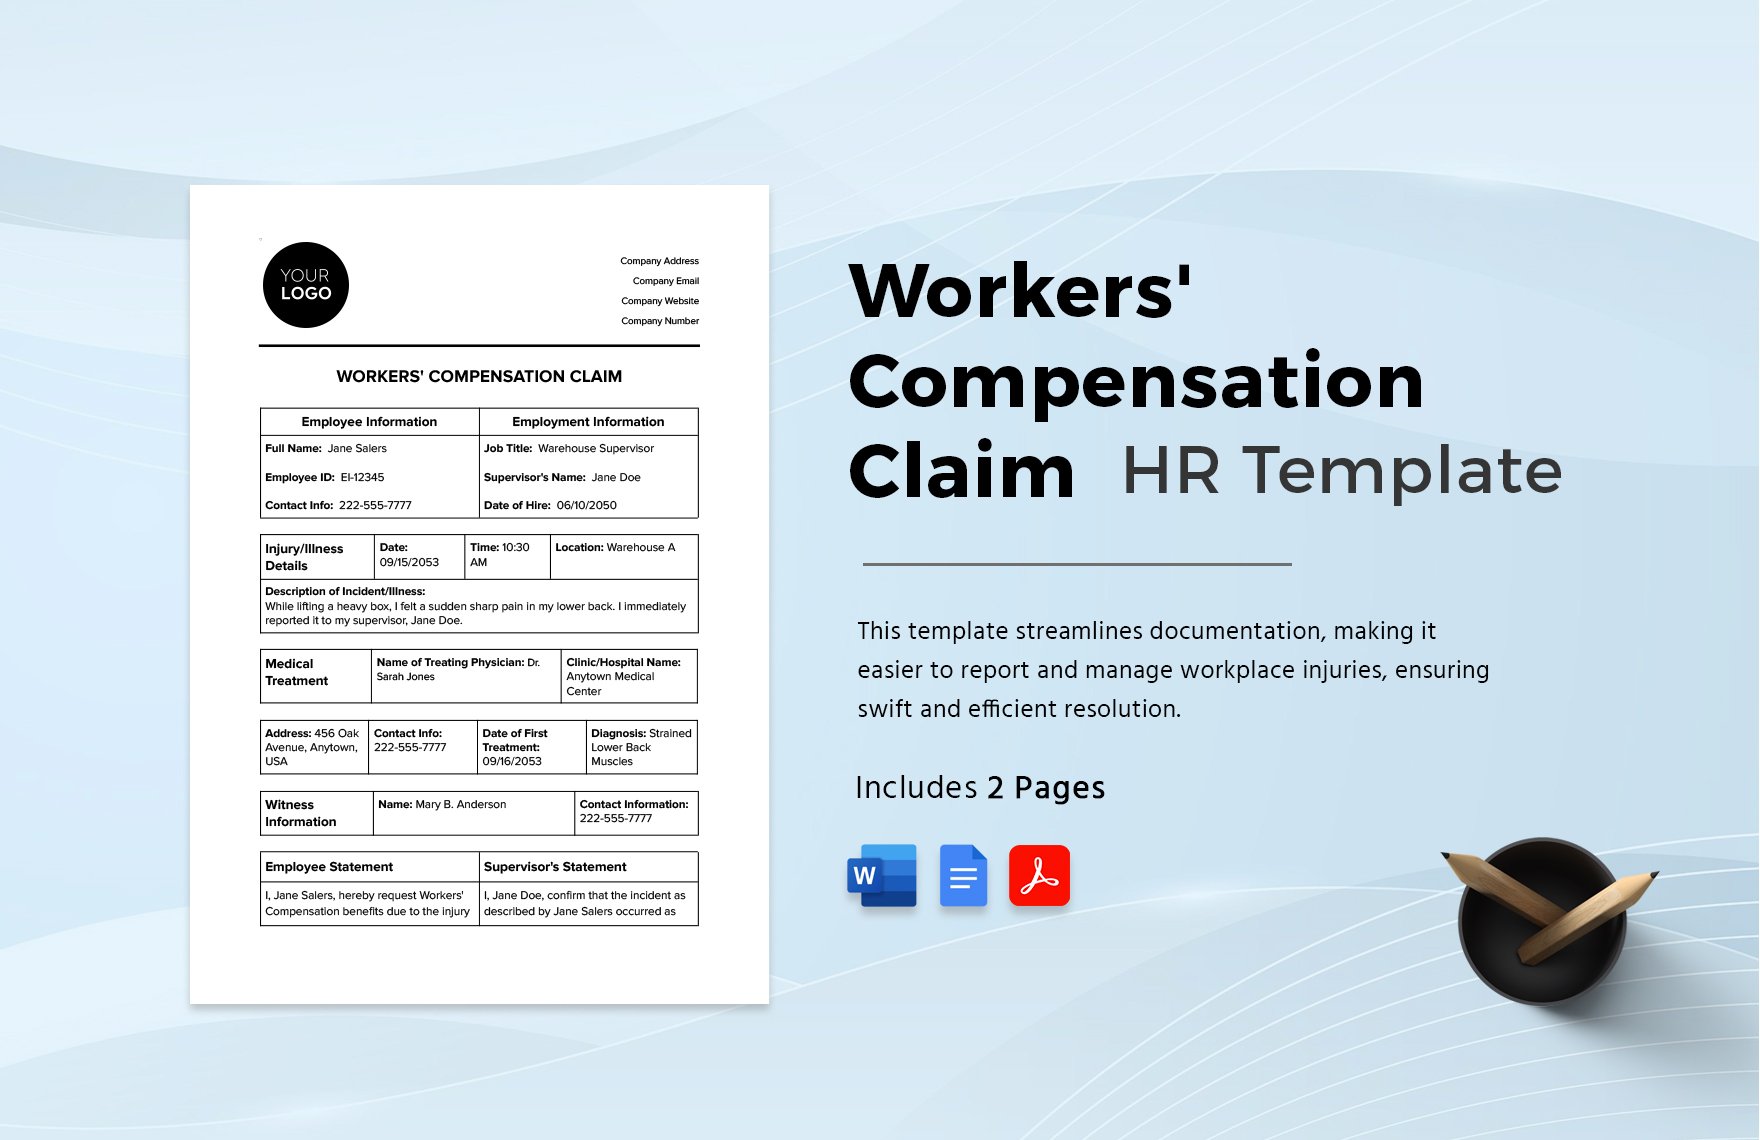 Workers' Compensation Claim HR Template in Word, Google Docs, PDF